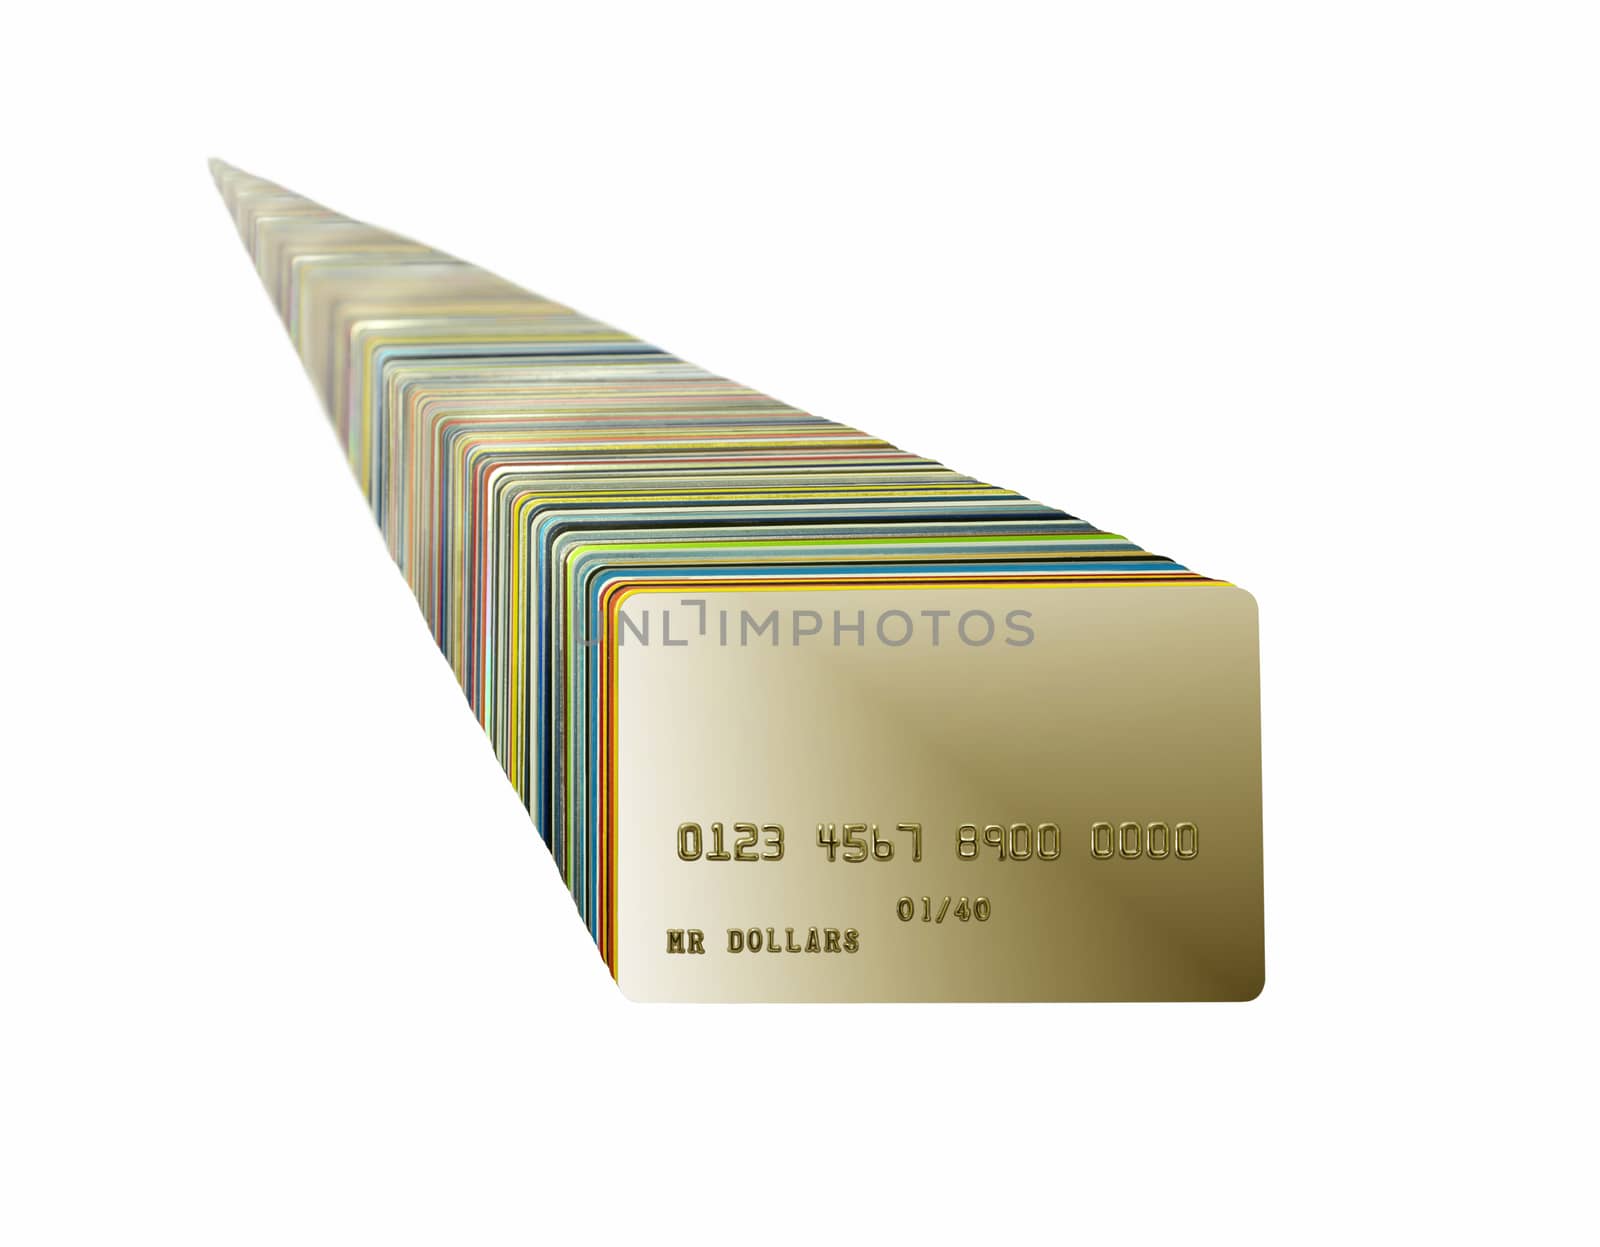 A stack of endless credit cards in white background